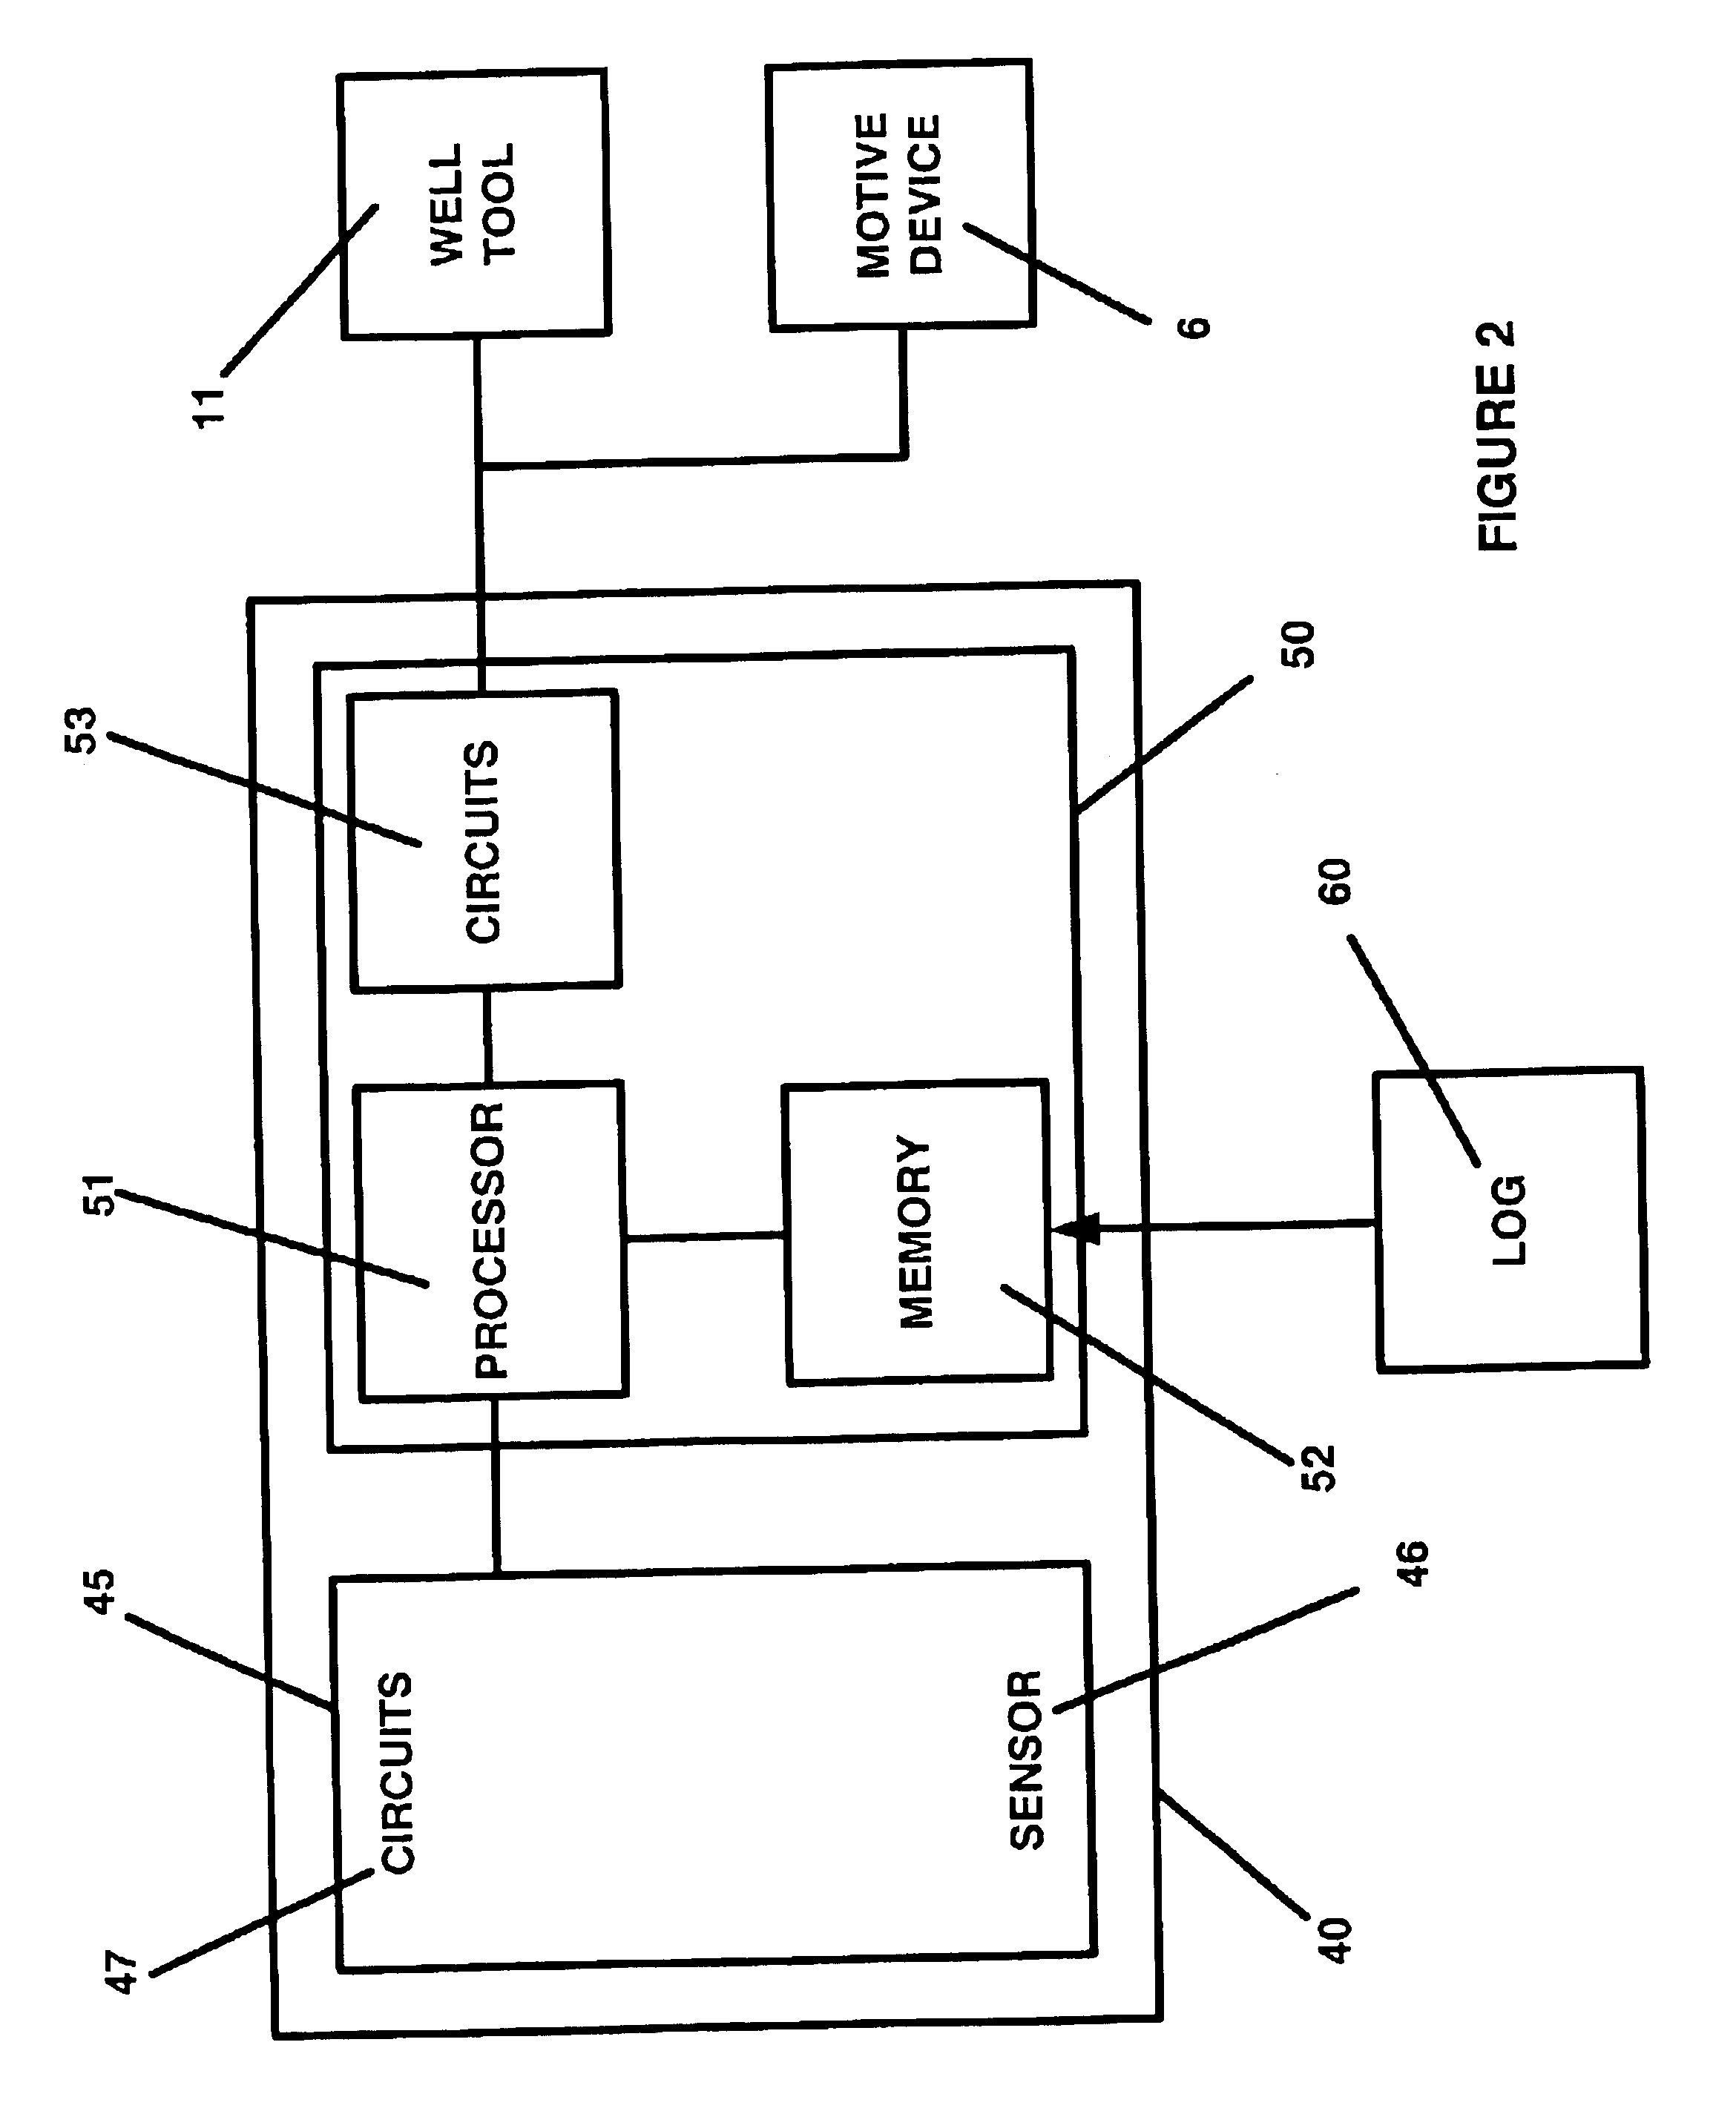 System and method for autonomously performing a downhole well operation